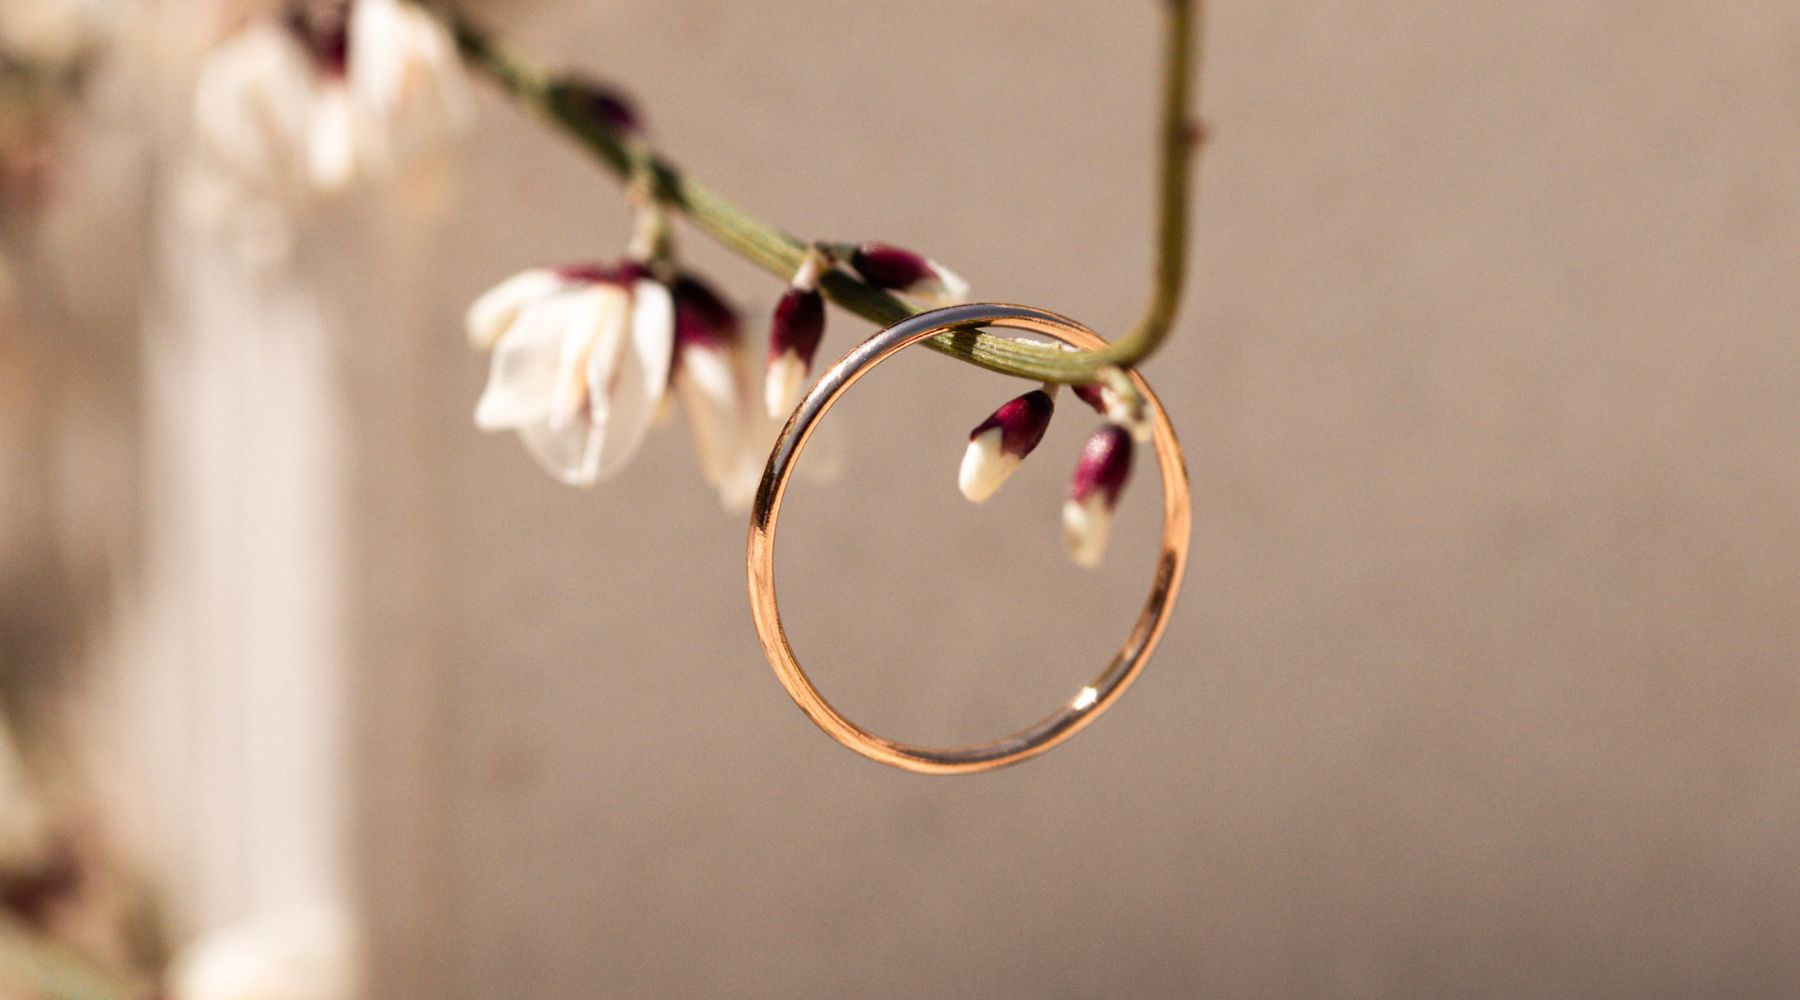 blossom two row ring pink gold